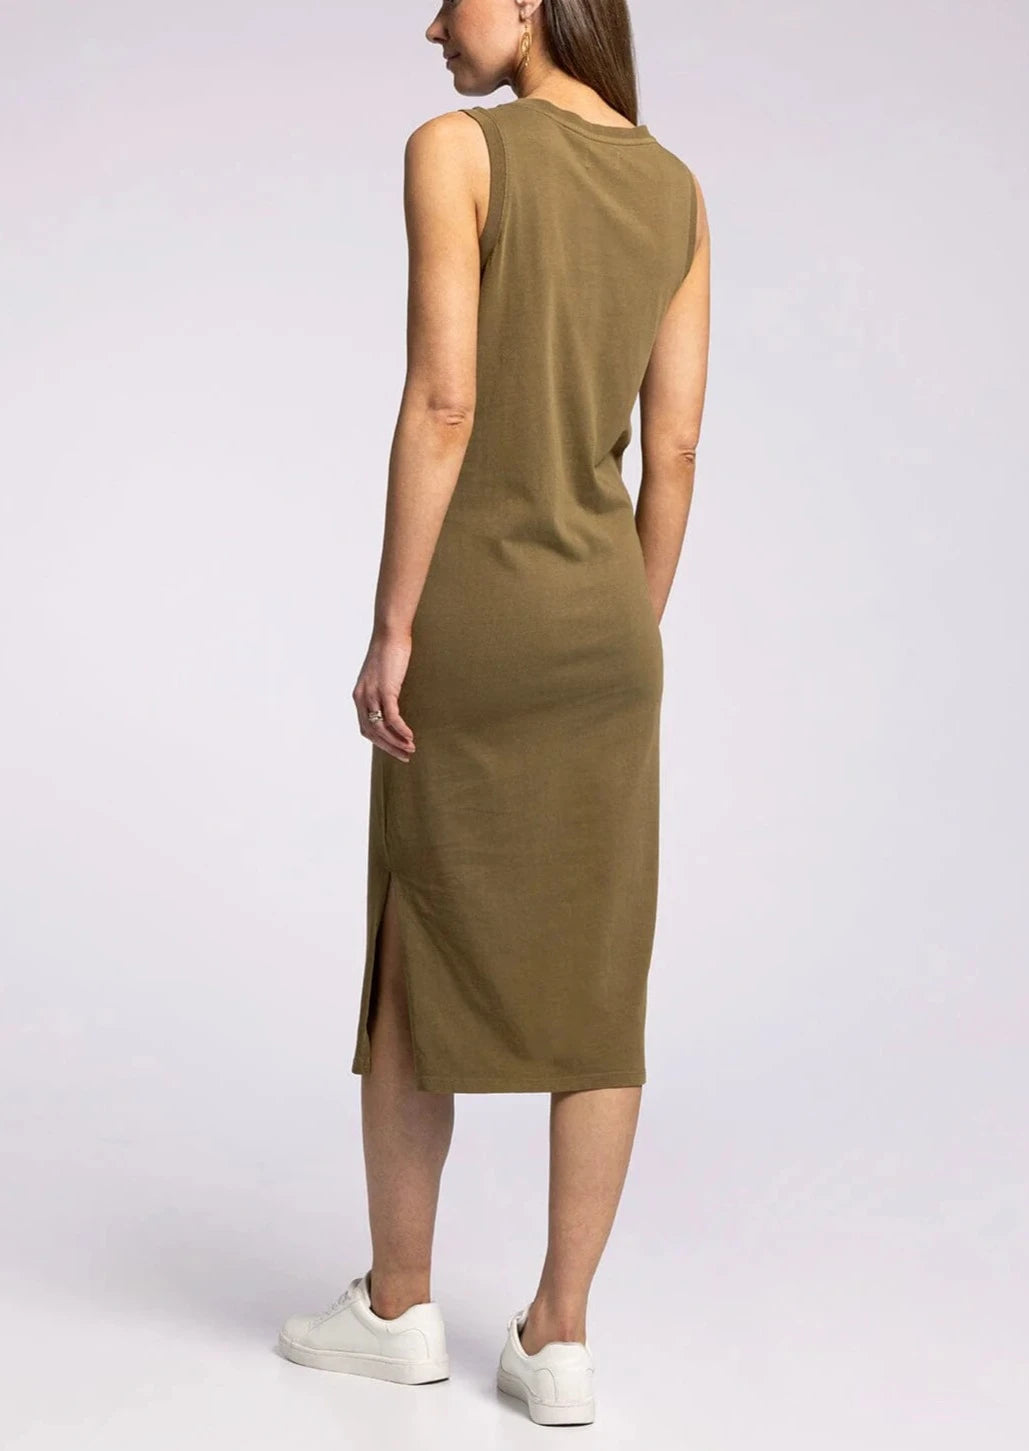 The Wilfred Dress